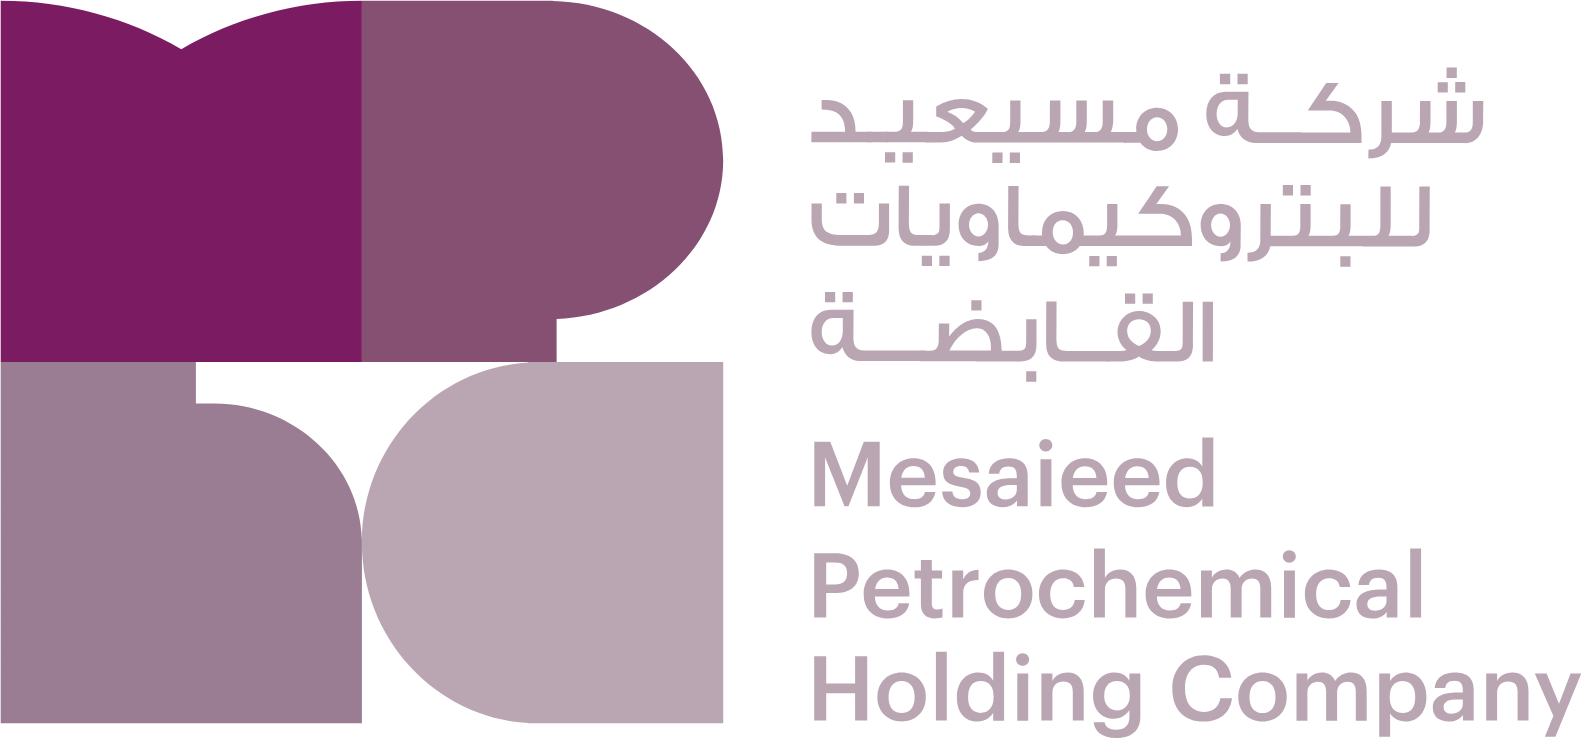 Mesaieed Petrochemical Holding Company logo large (transparent PNG)